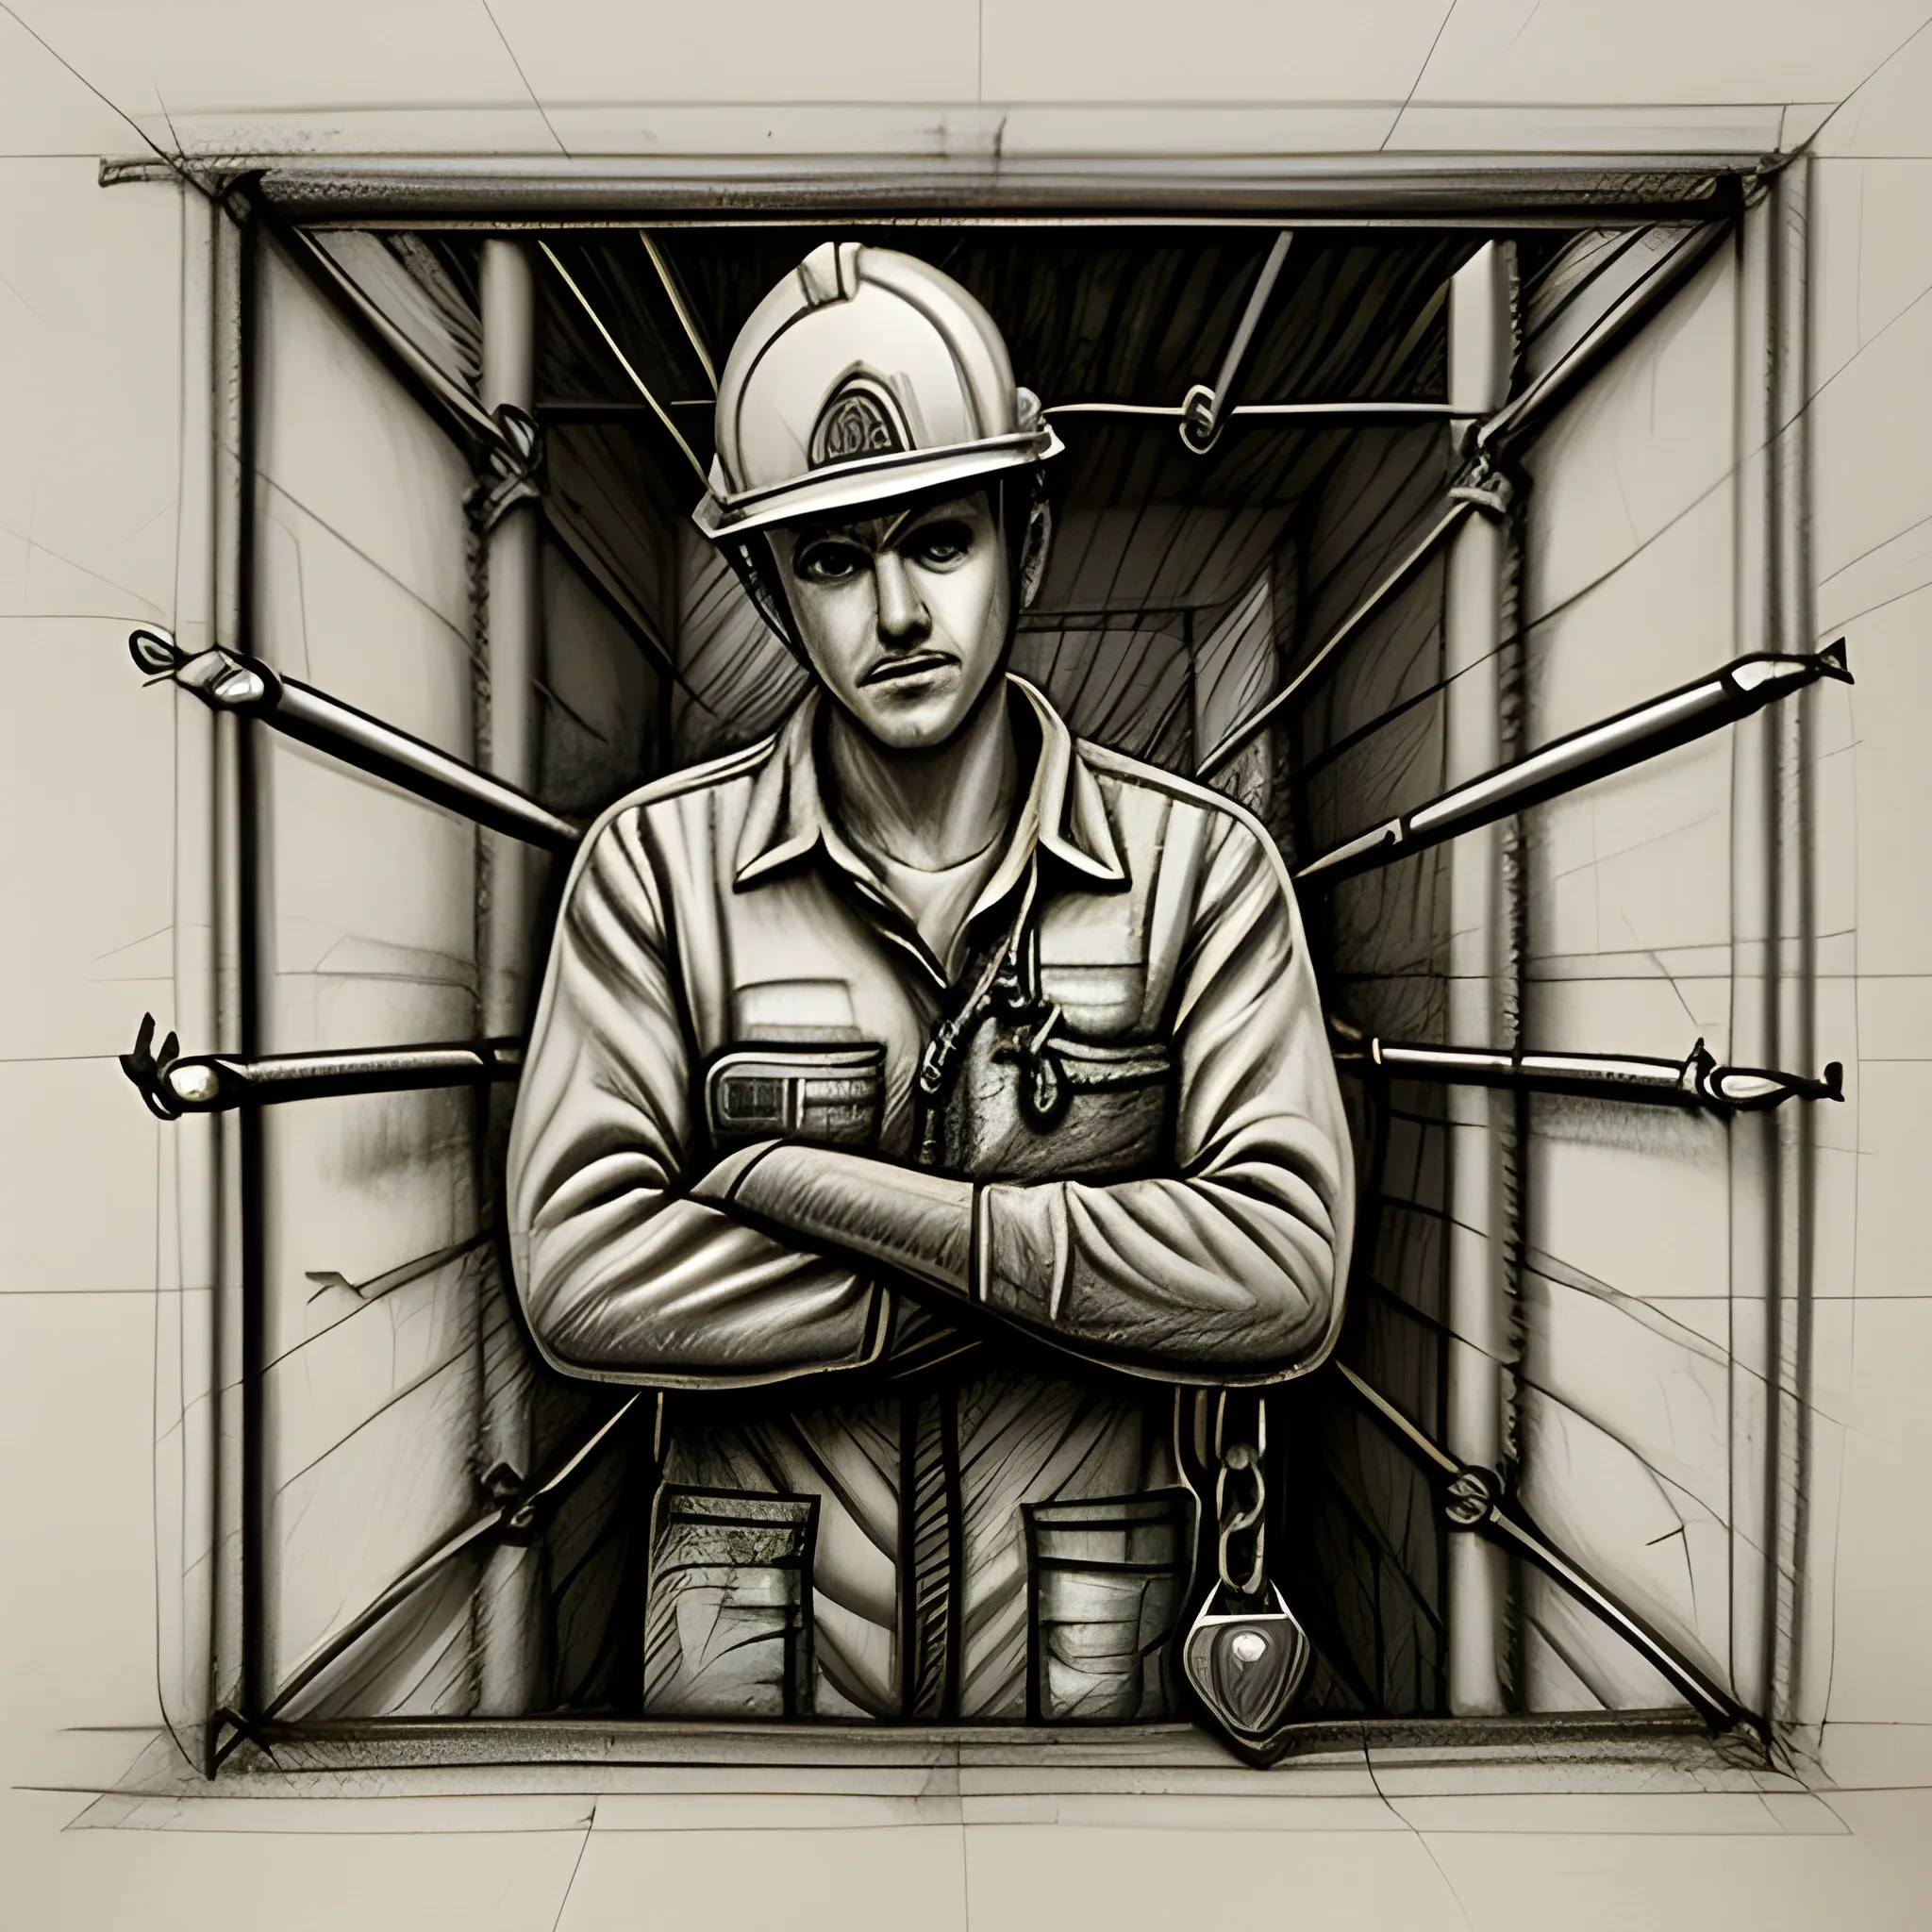 , Pencil Sketch person trapped in prison wearing and engineer outfit holding a wrench